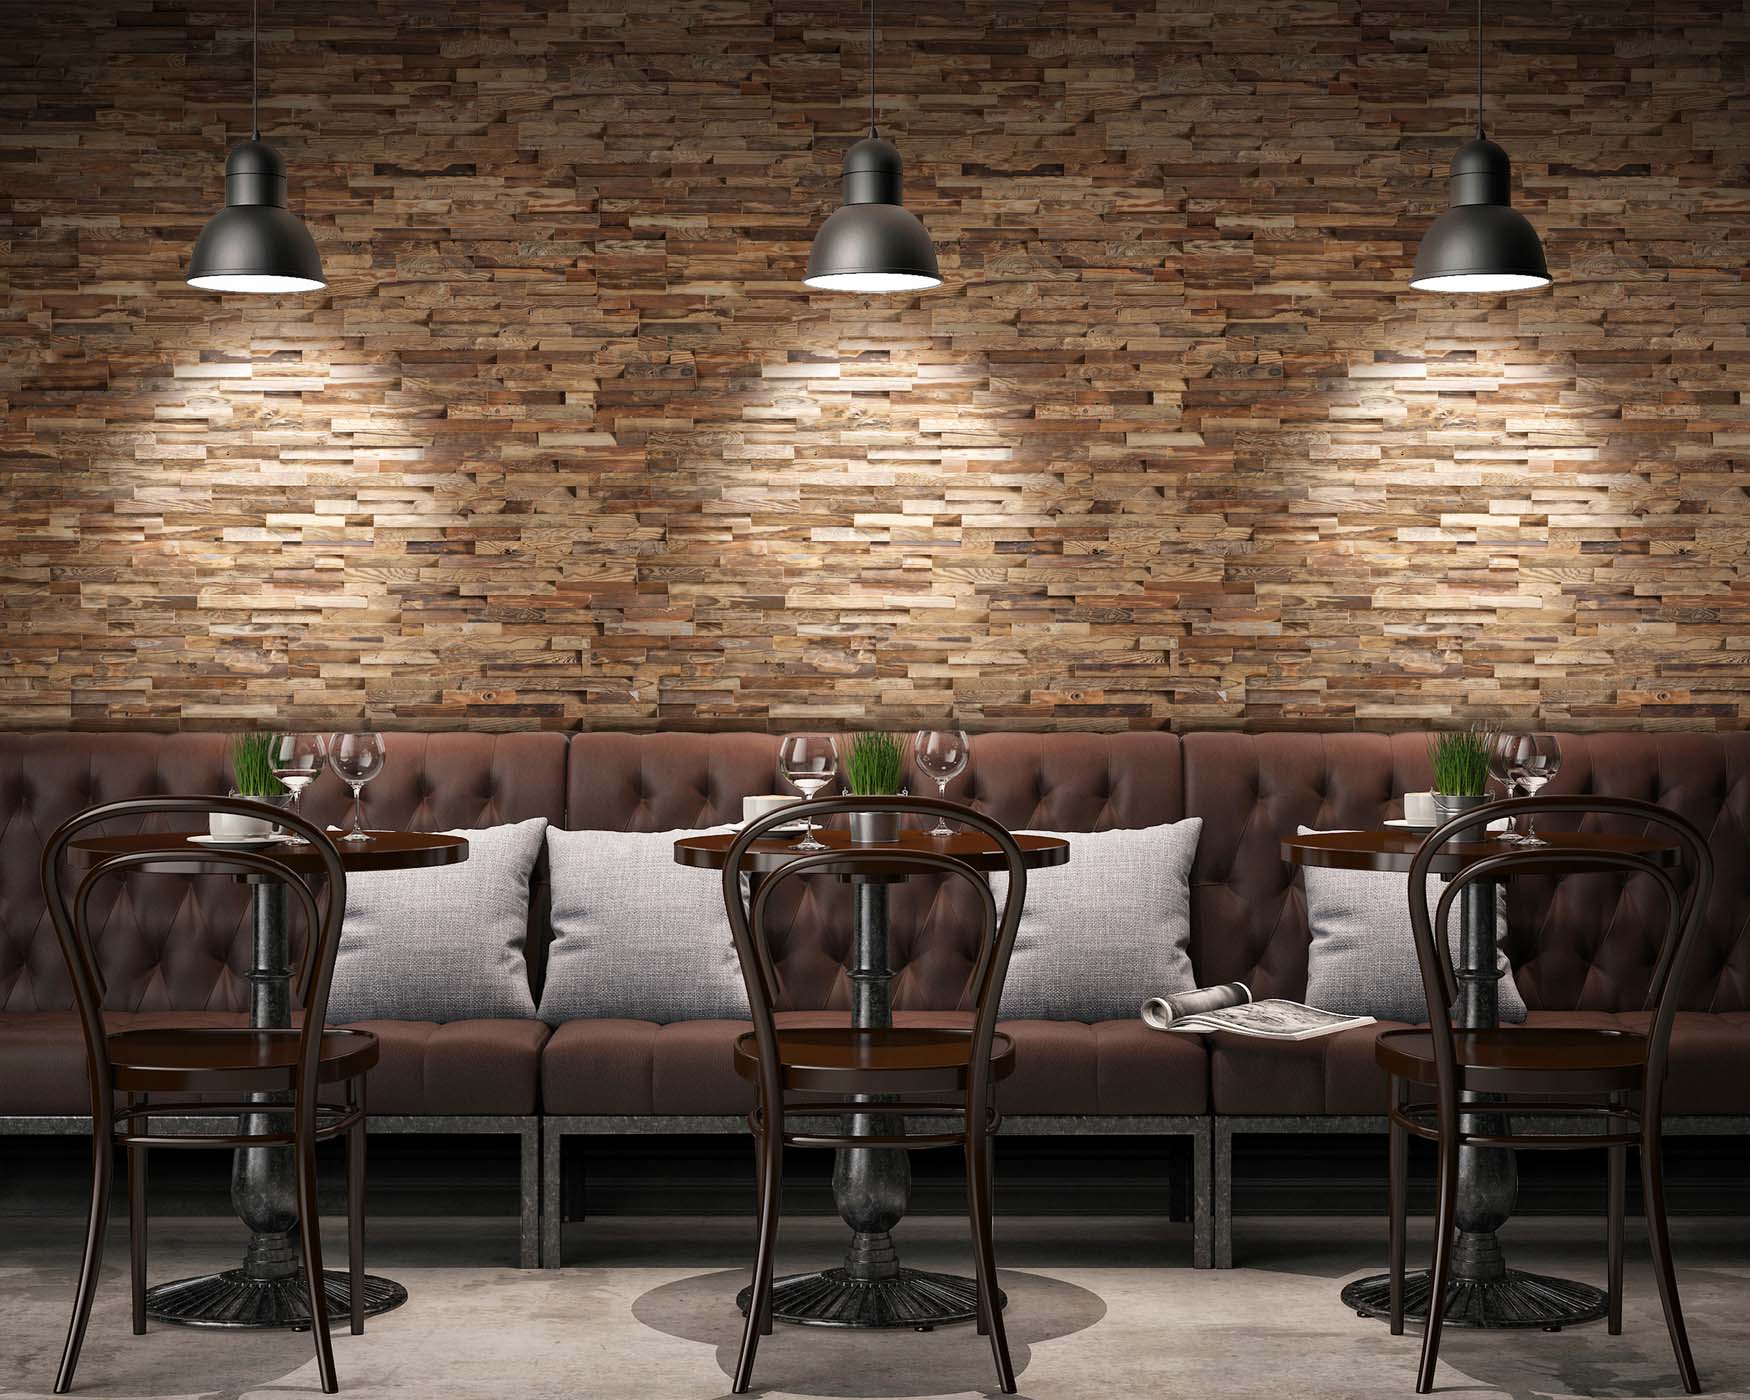 Decorative wall panels in restaurant